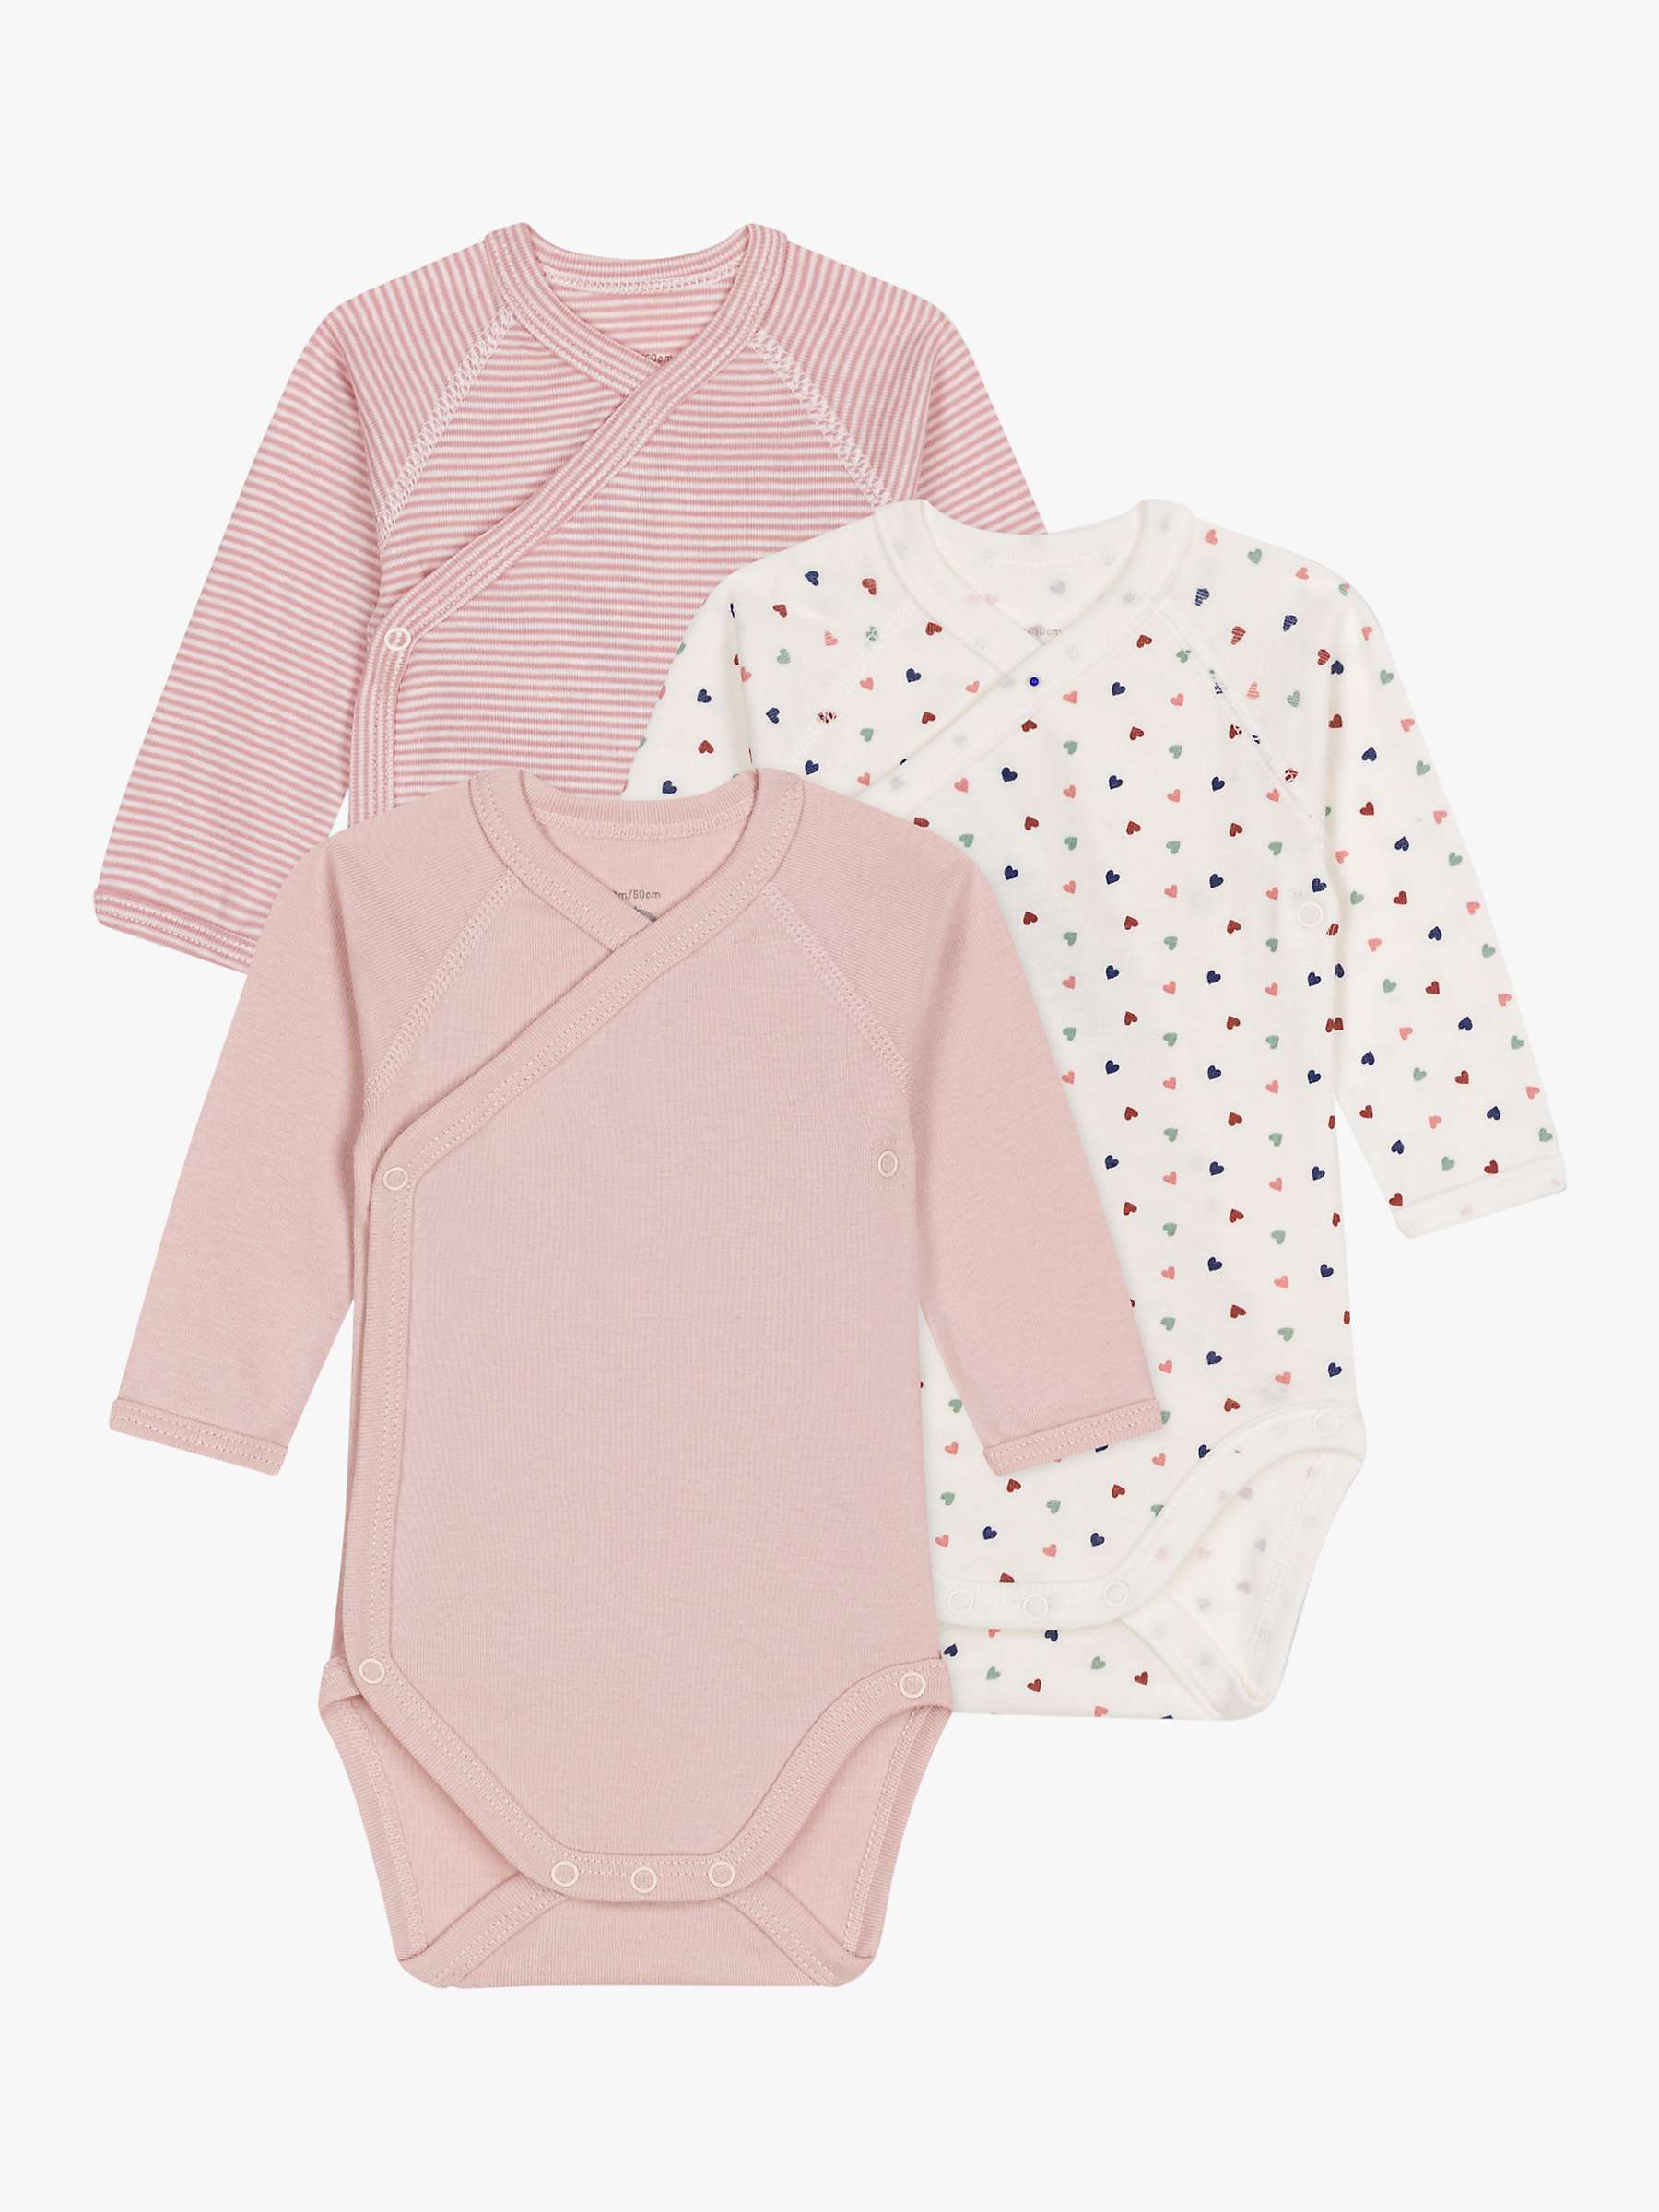 Buy Petit Bateau Baby Heart/Stripe Cotton Wrapover Bodysuits, Pack Of 3, Pink/Multi Online at johnlewis.com